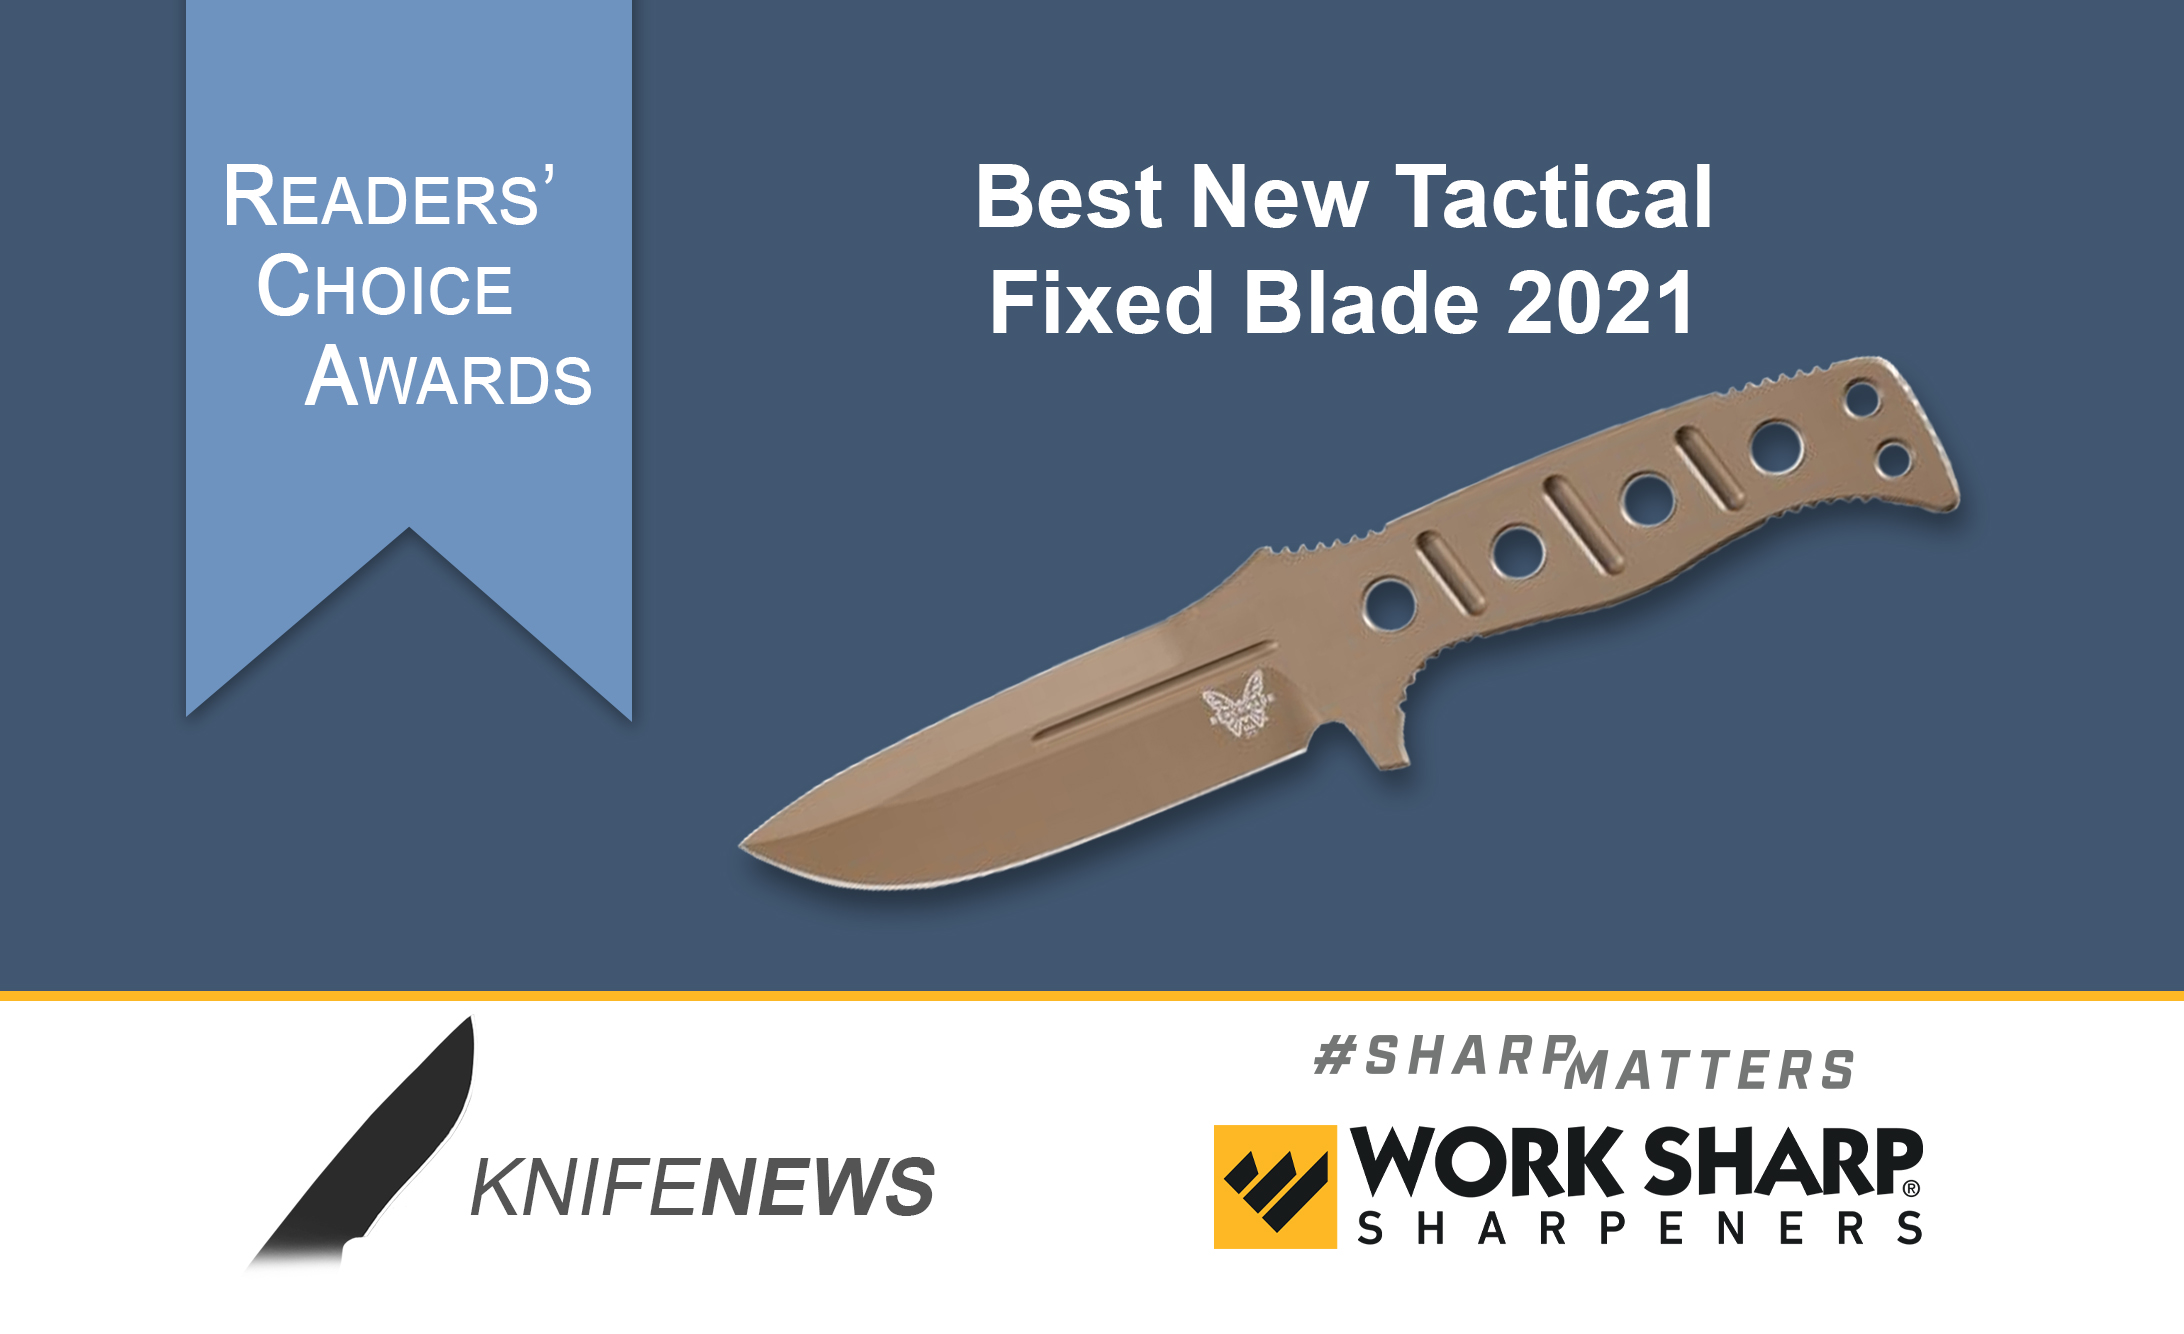 Benchmade 375 Adamas Voted Best New Tactical Fixed Blade 2021